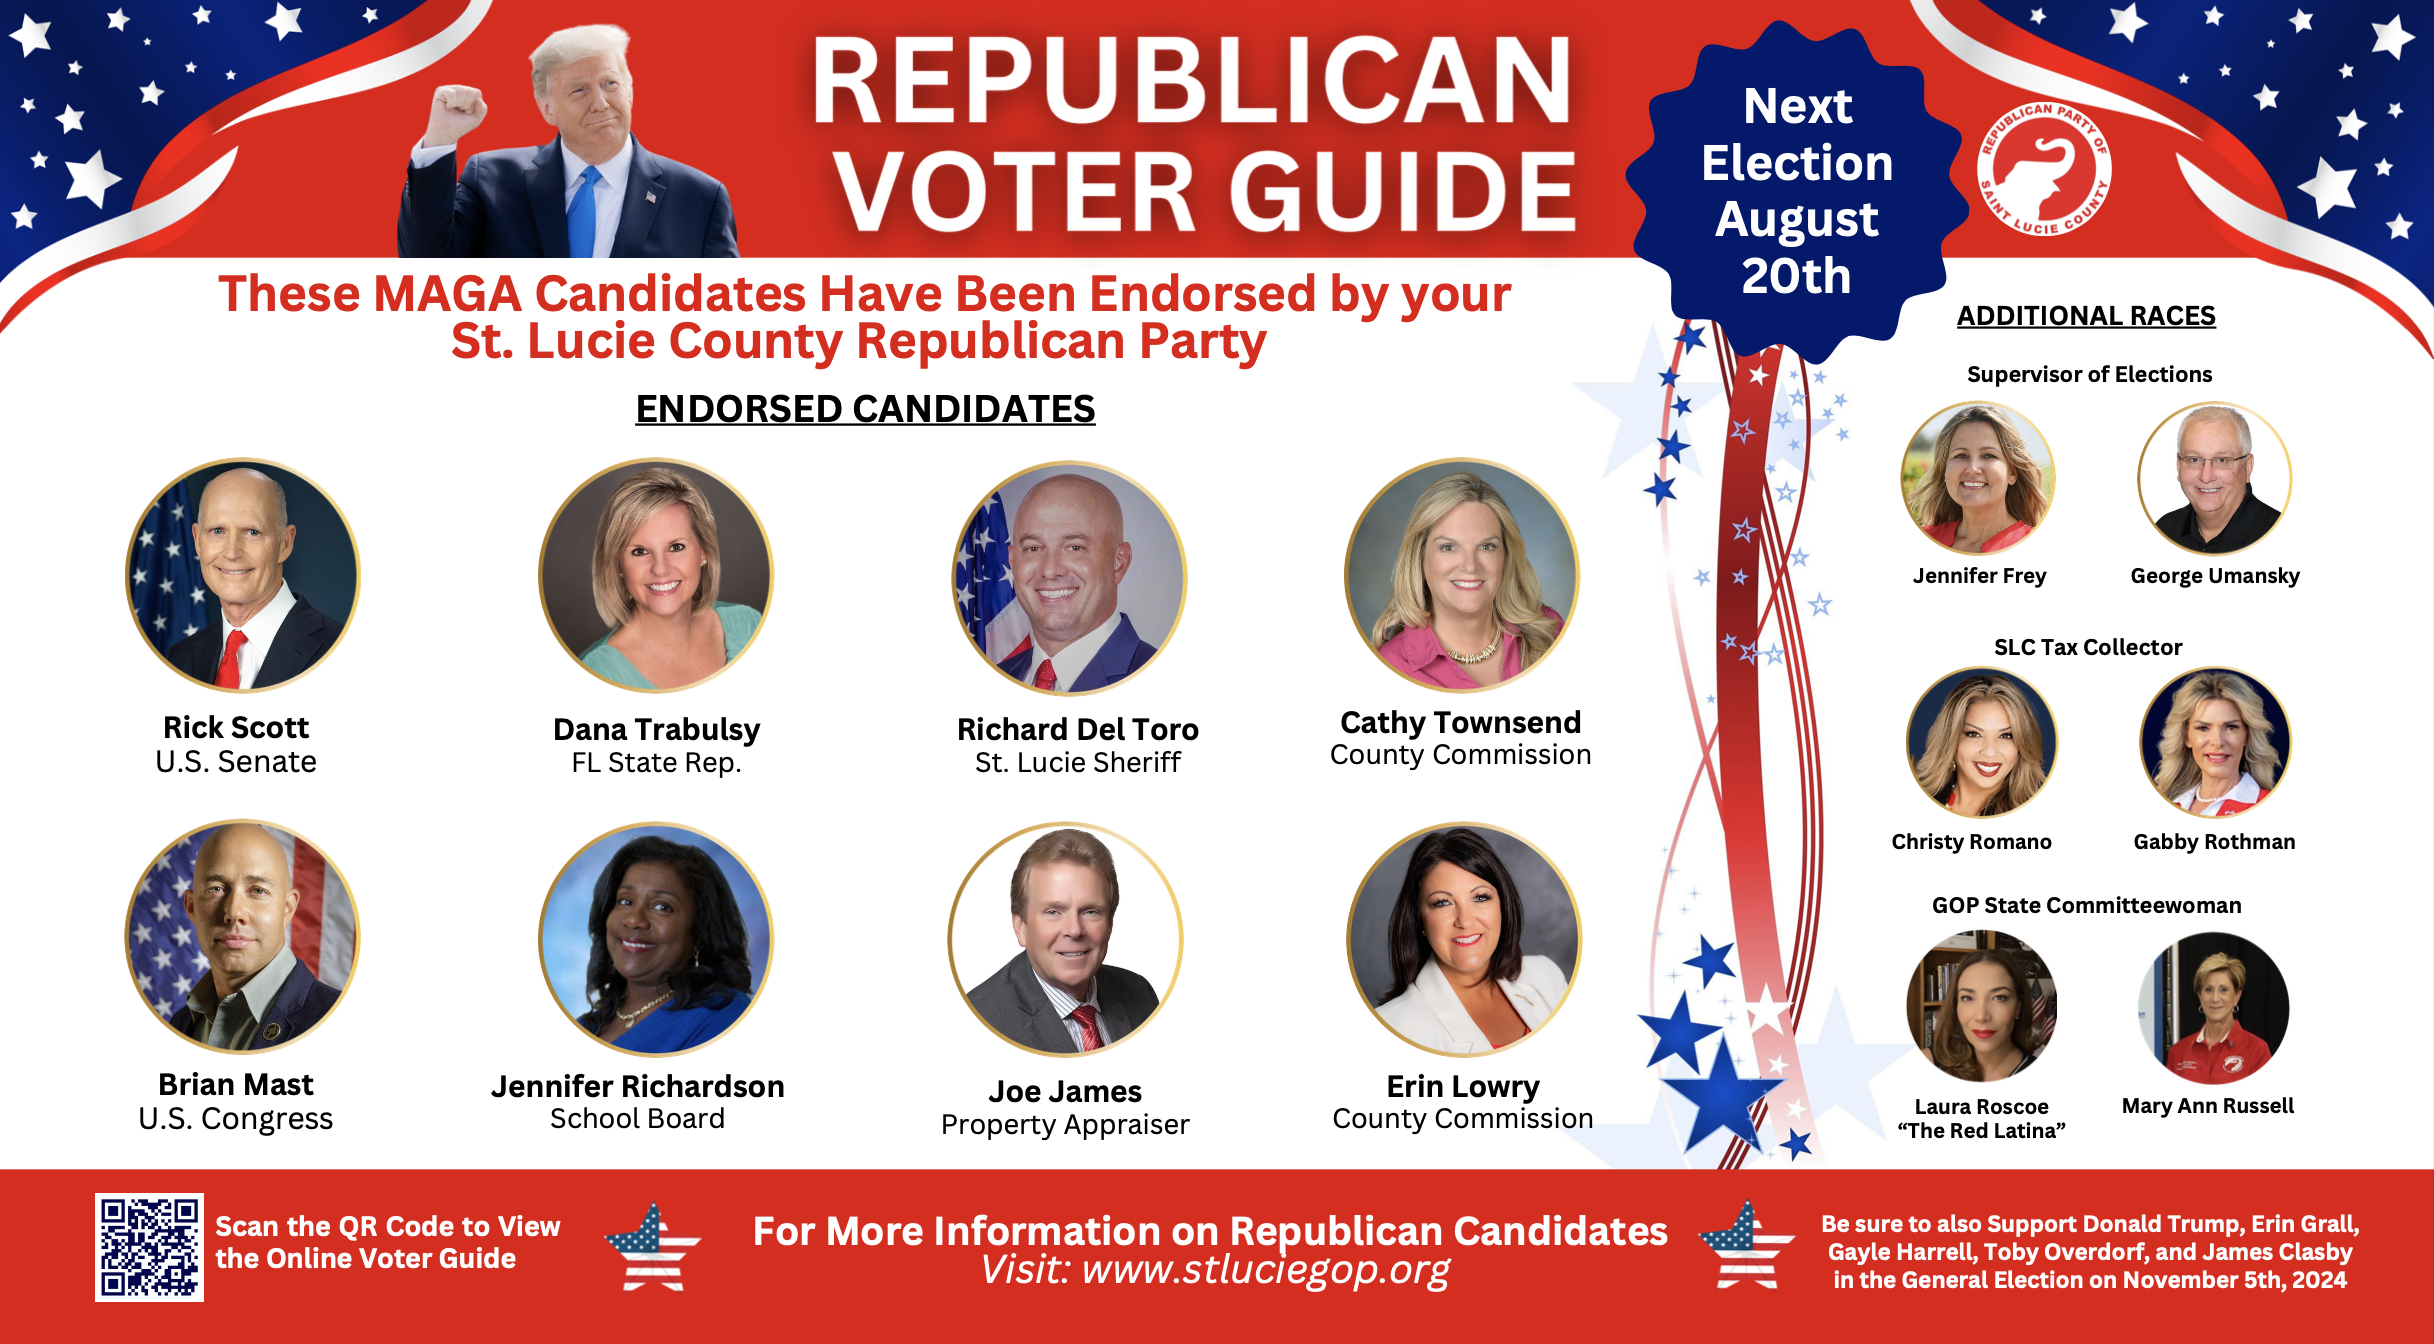 St. Lucie Republican Voter Guide